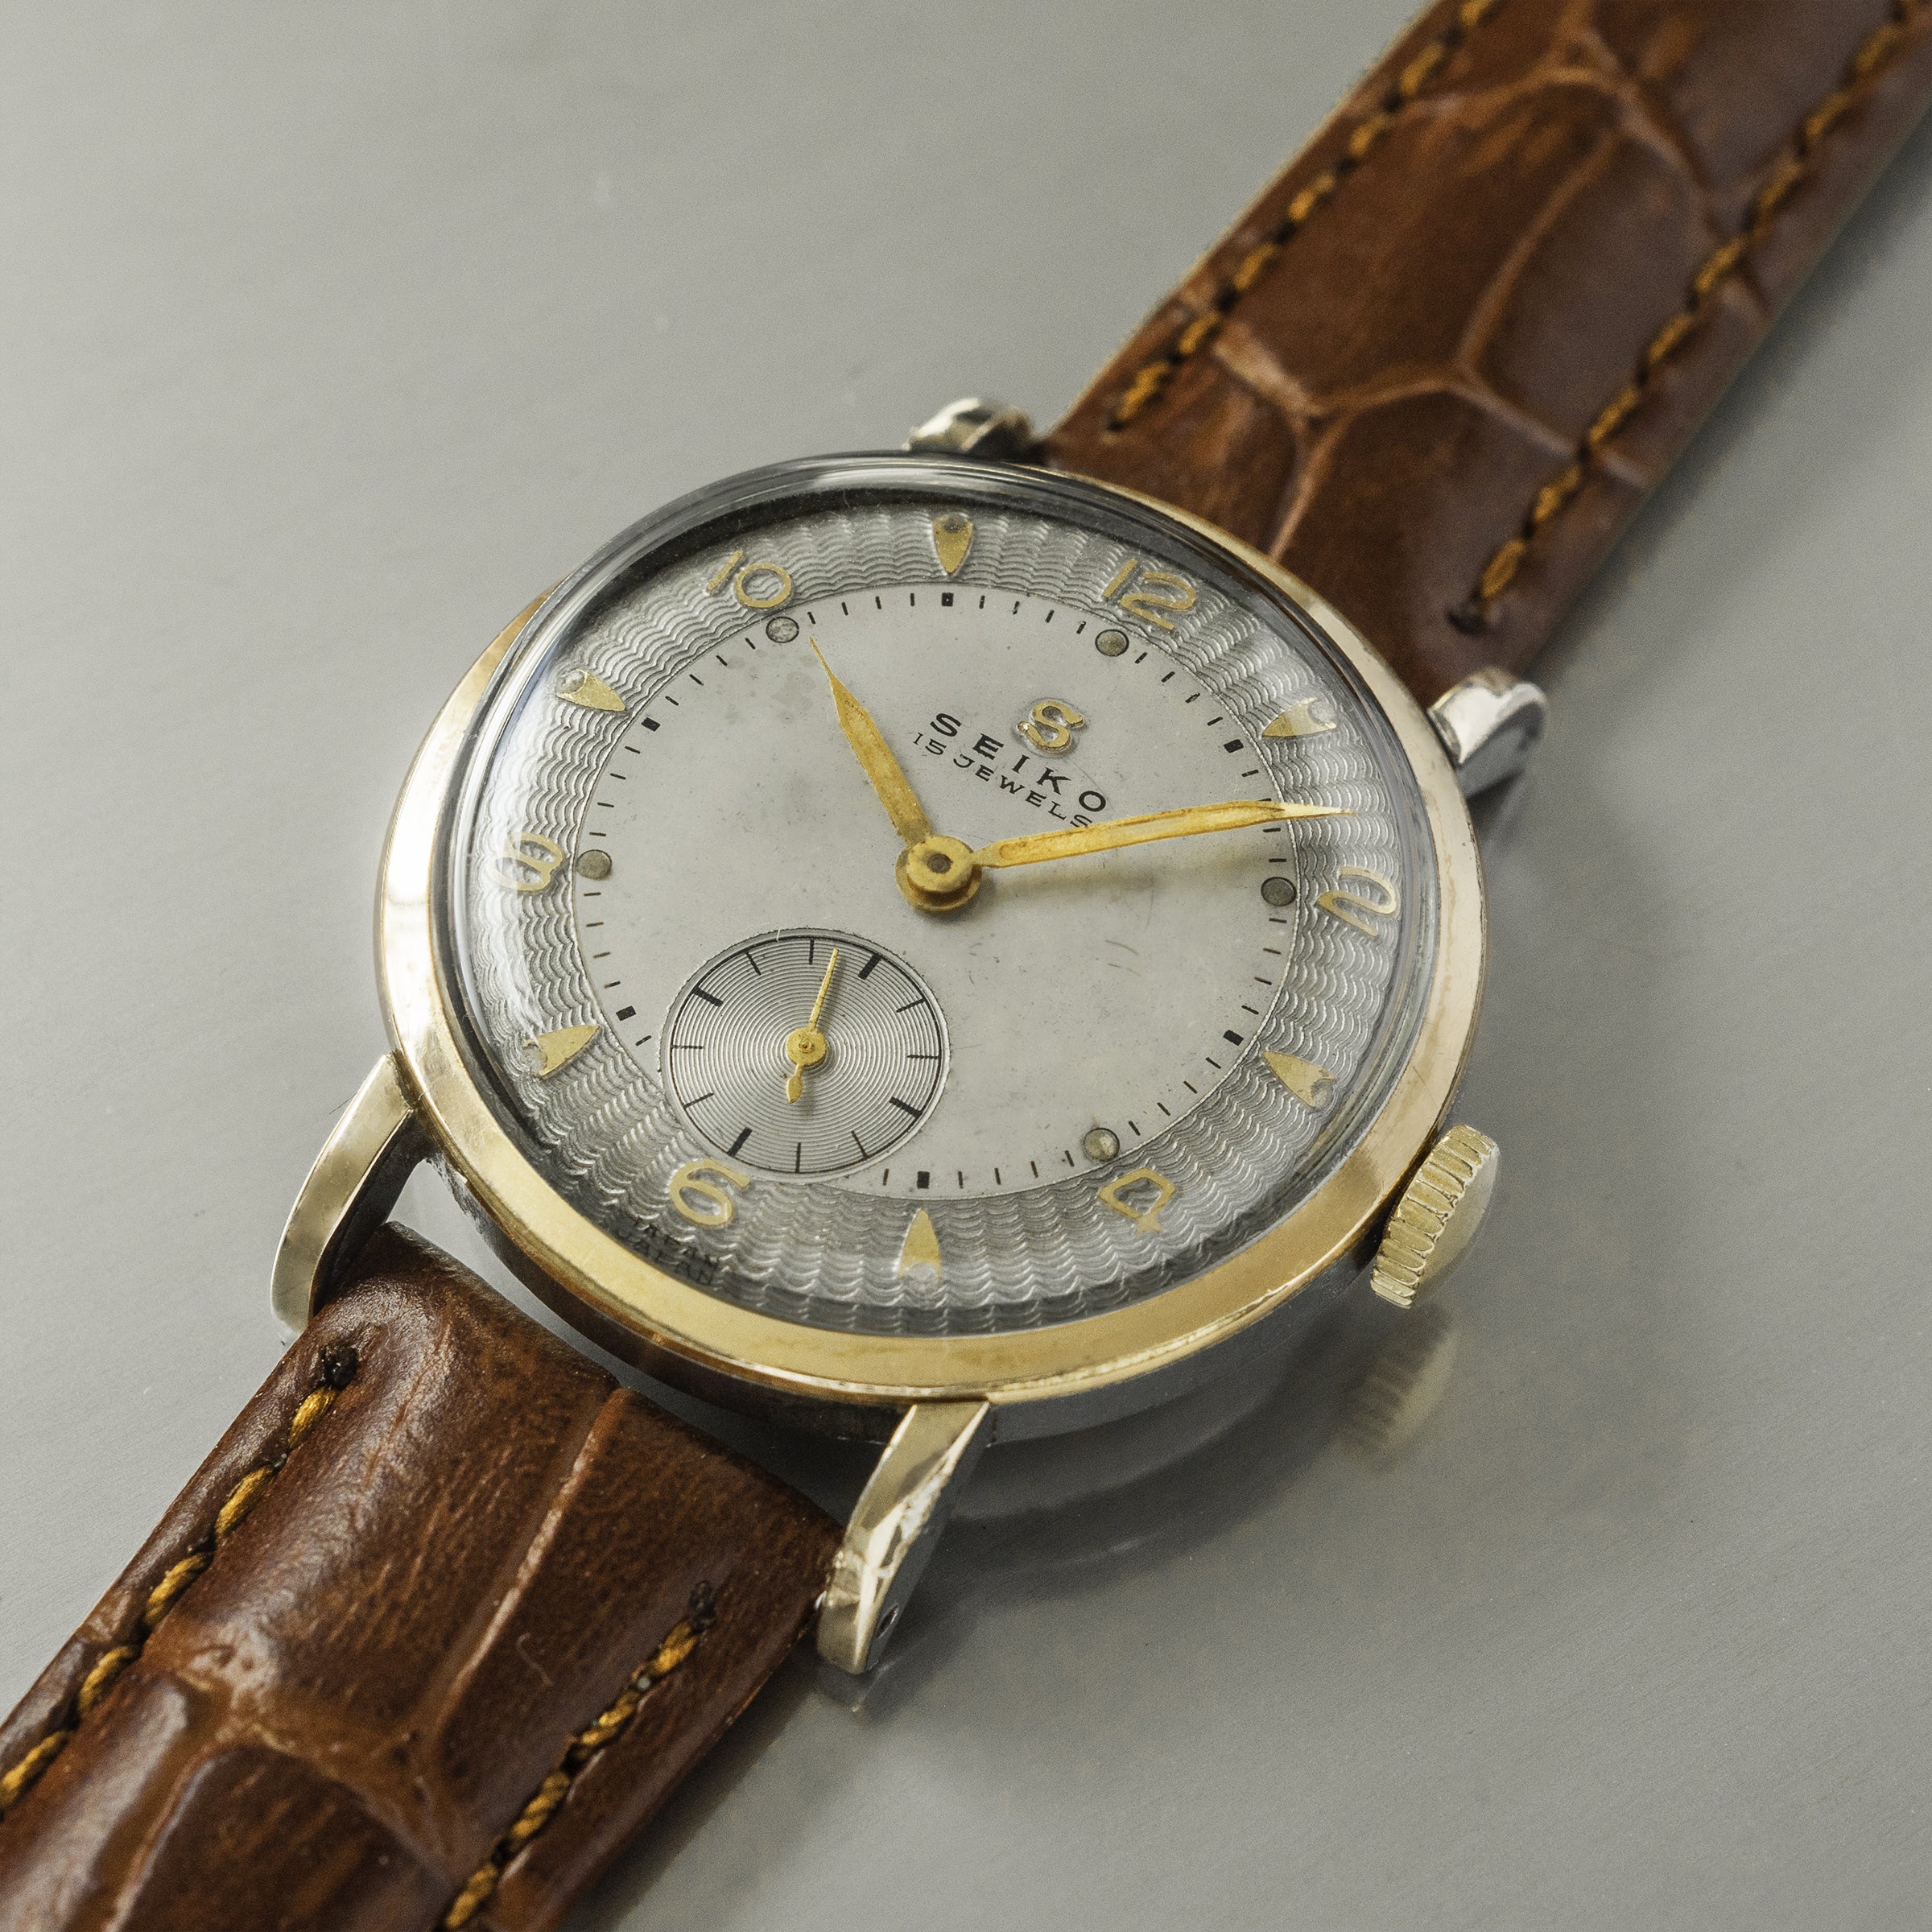 Our vintage watch collection from the Japanese brand, Seiko 